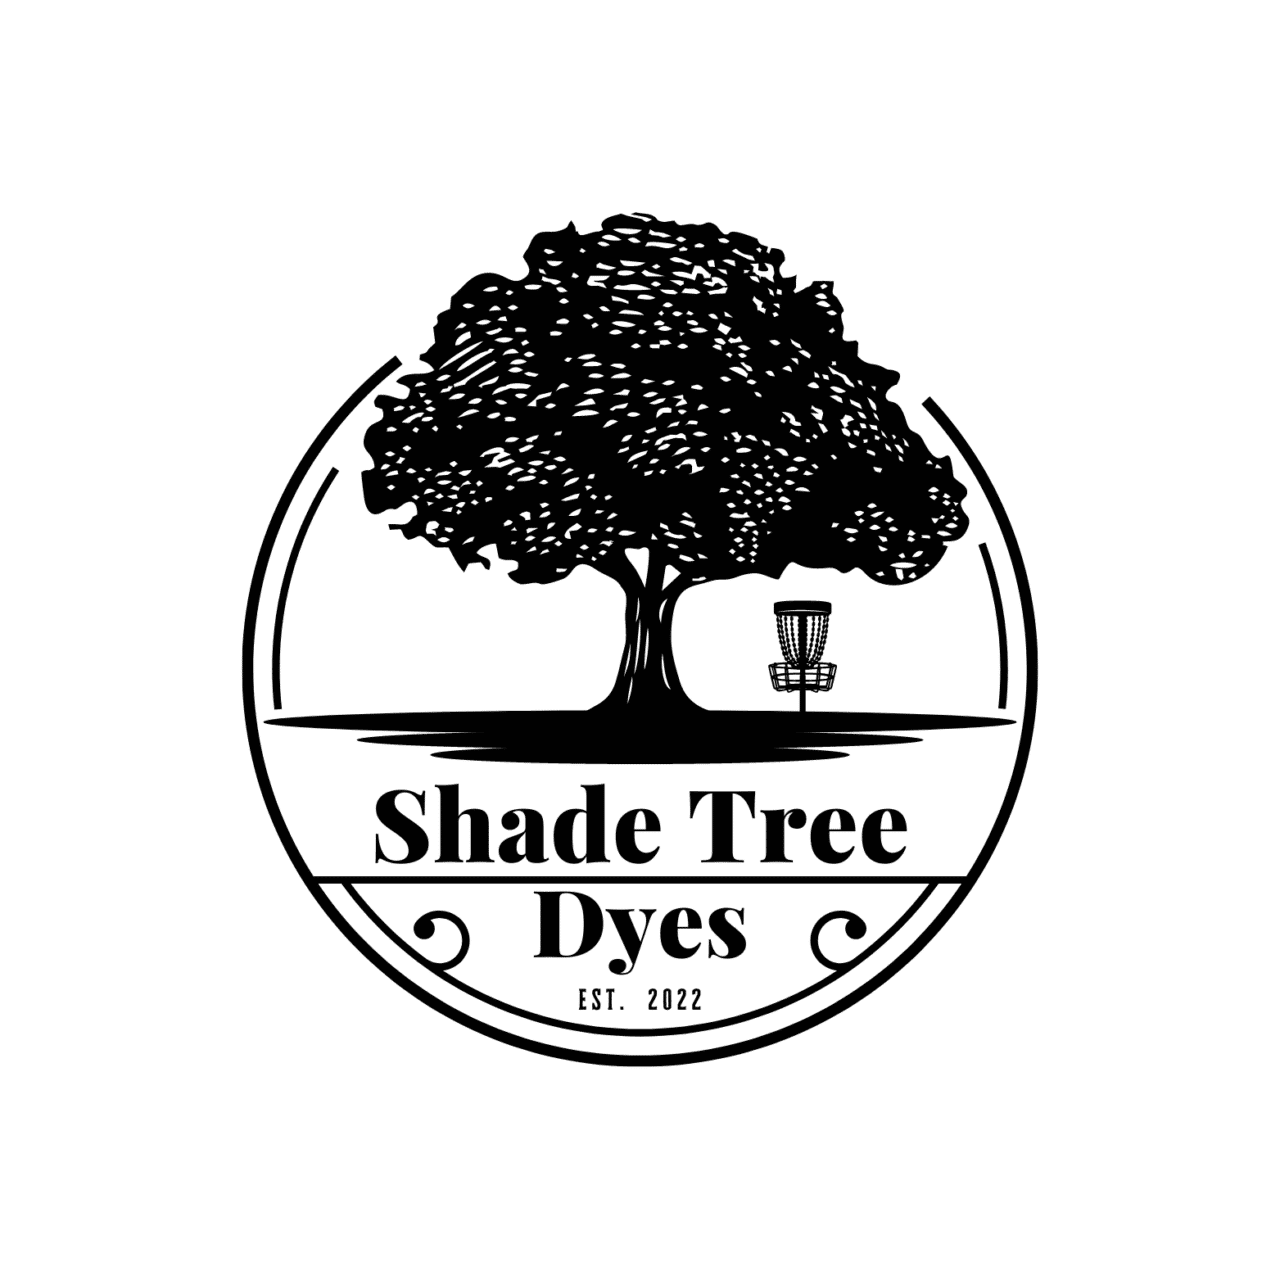 Shade Tree Dyes